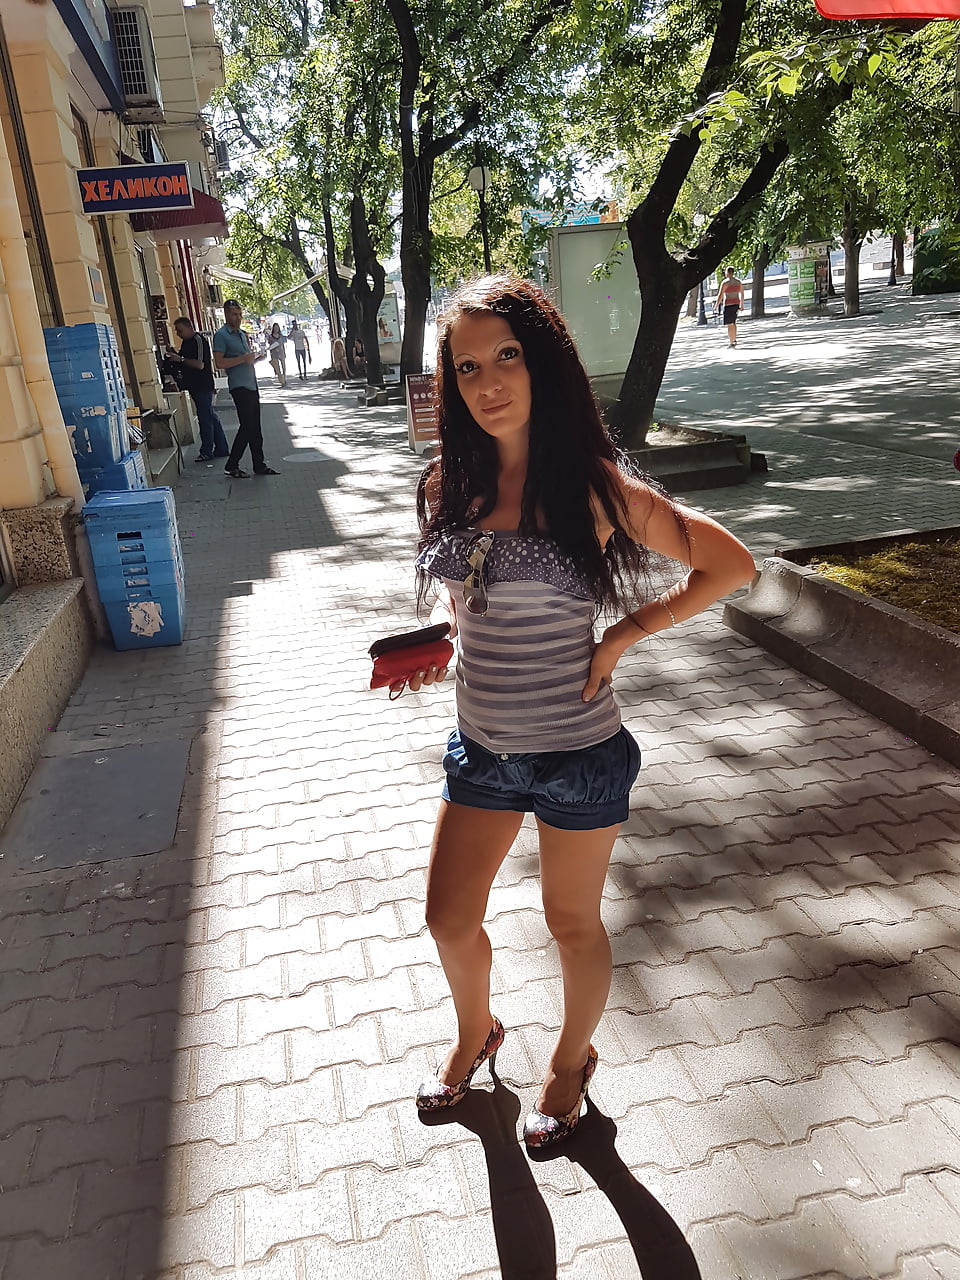 Bulgarian bitch in dating site adult photos